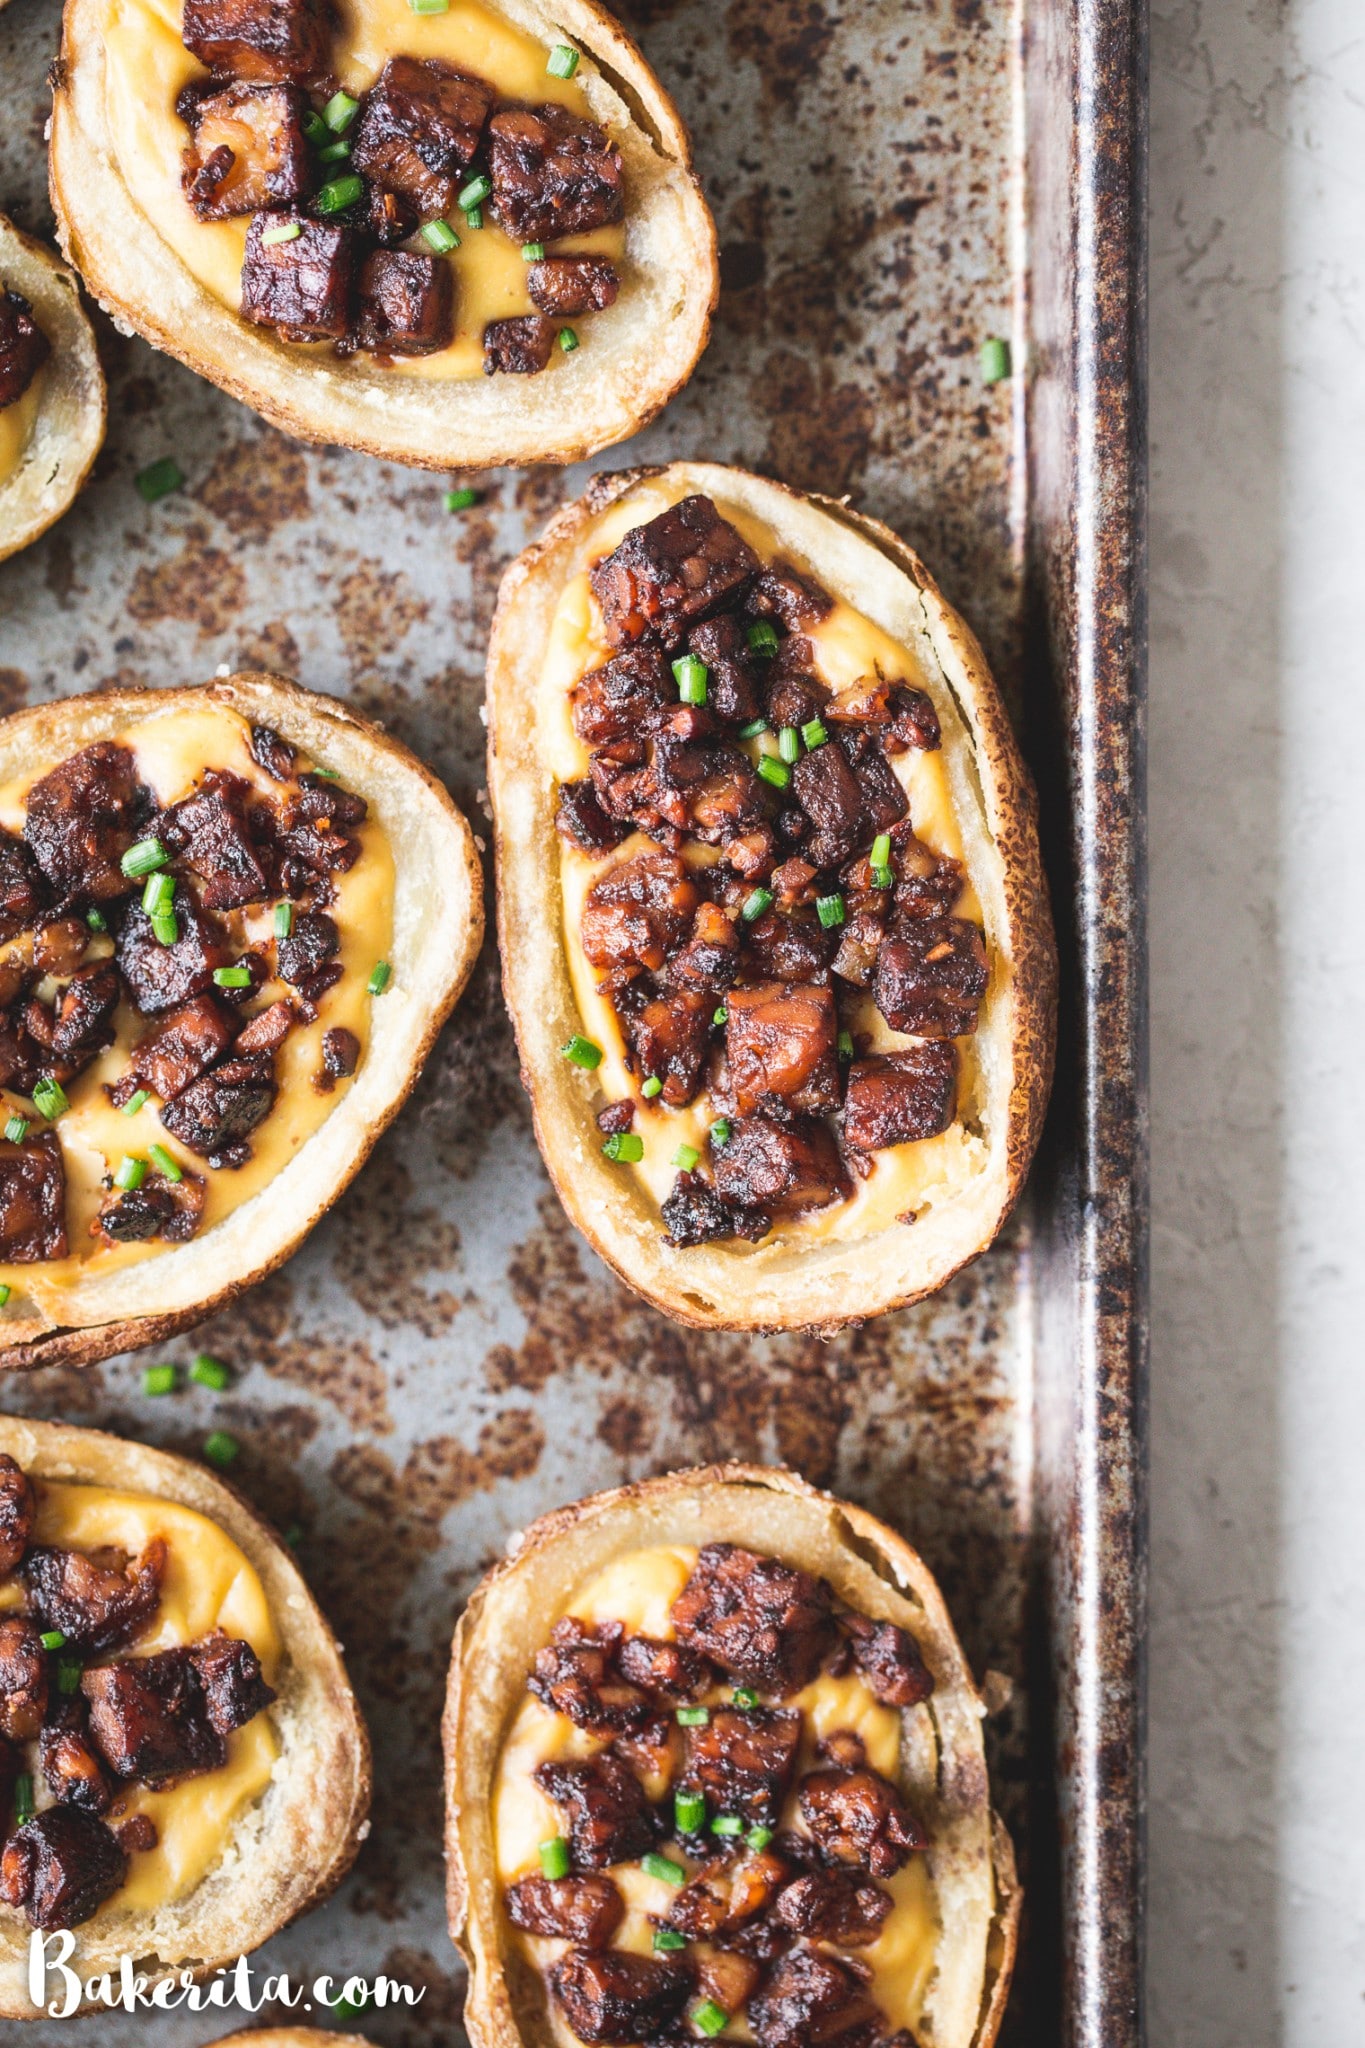 These Vegan Potato Skins are my new favorite vegan appetizer! Baked instead of fried, these are a healthier take on the classic. They're made with vegan cheese sauce and the best tempeh bacon bits.